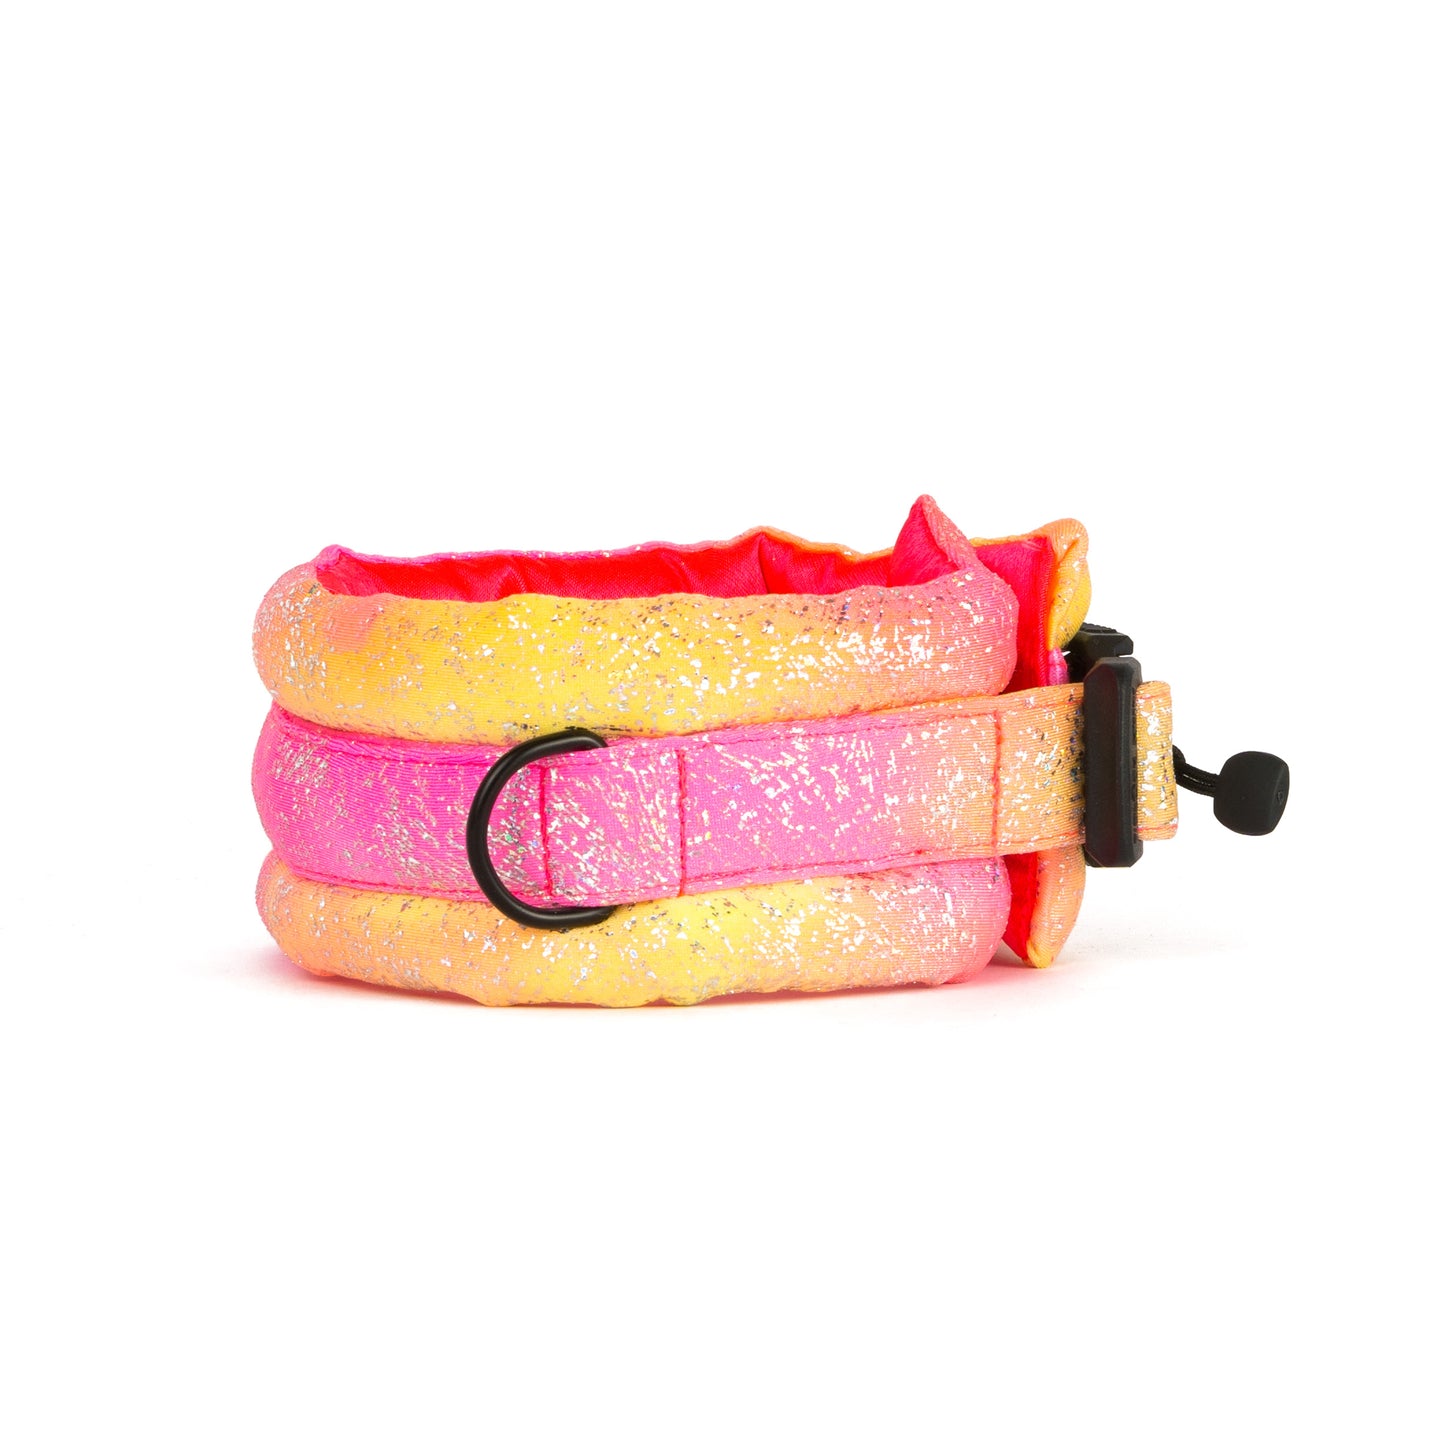 Medium Poodle Supply Fluffy Magnetic Collar Pink/Yellow Glossy Rainbow with Neon Pink